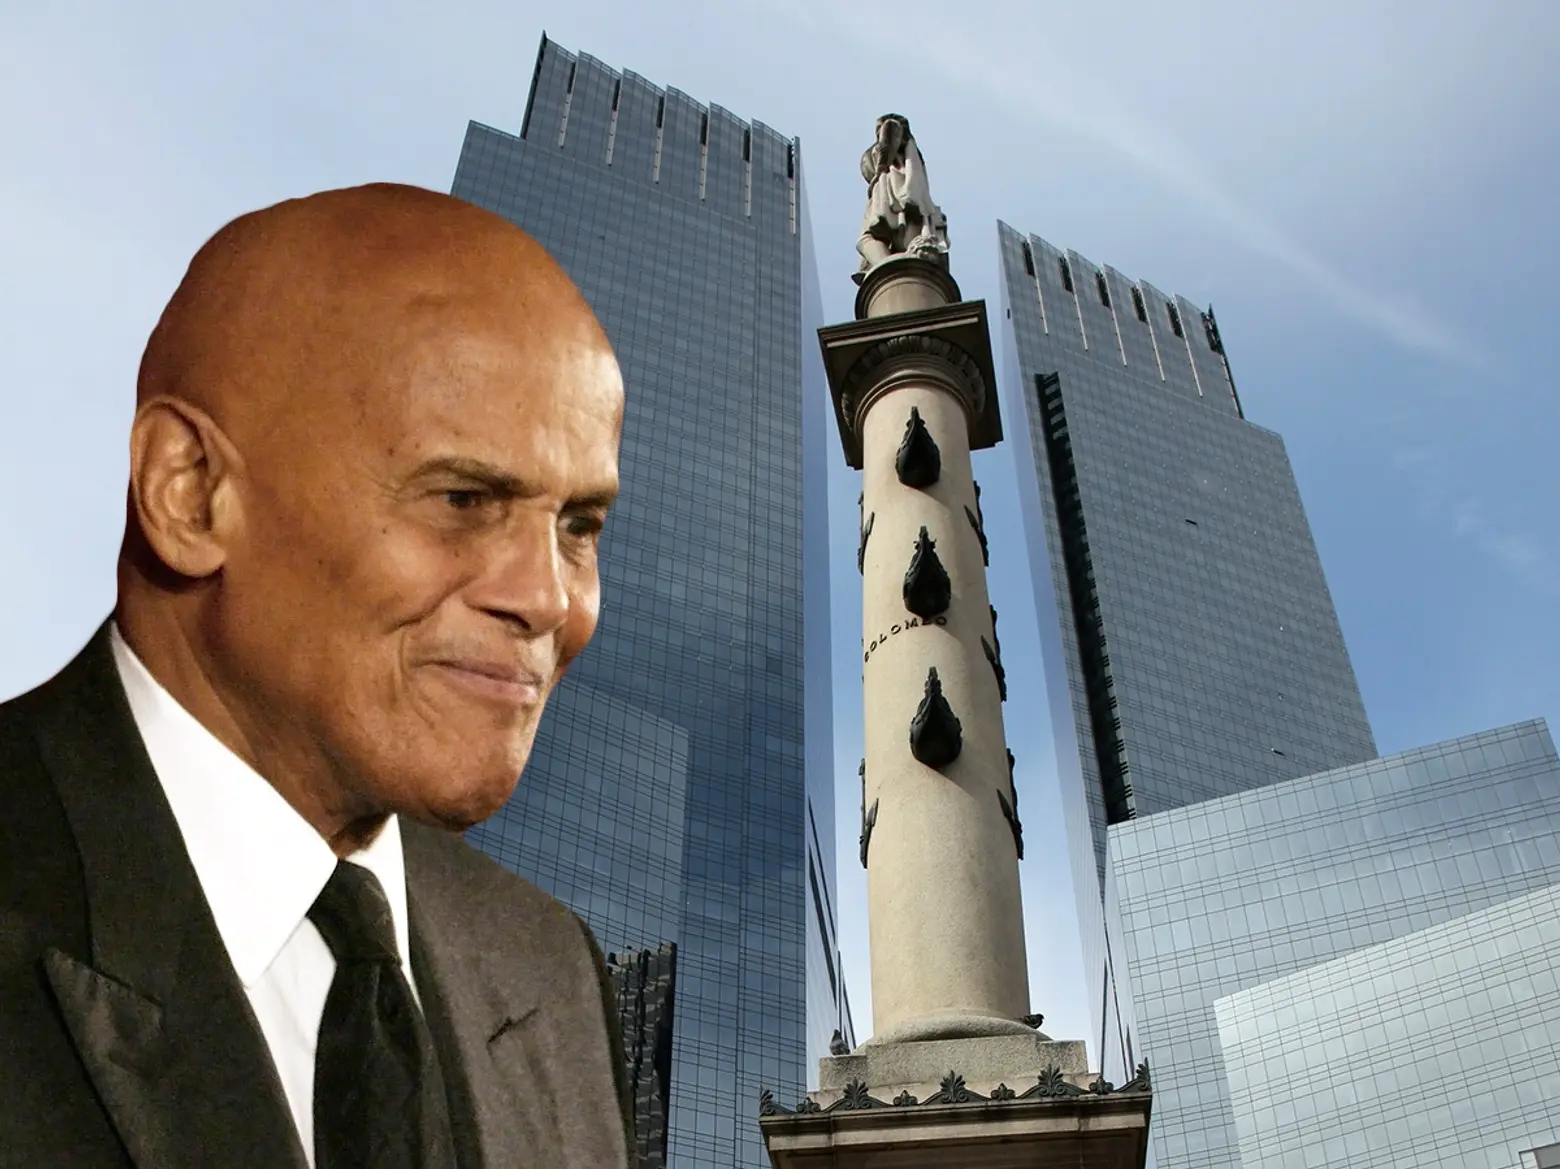 De Blasio announces 18-member committee, including Harry Belafonte, to review controversial monuments